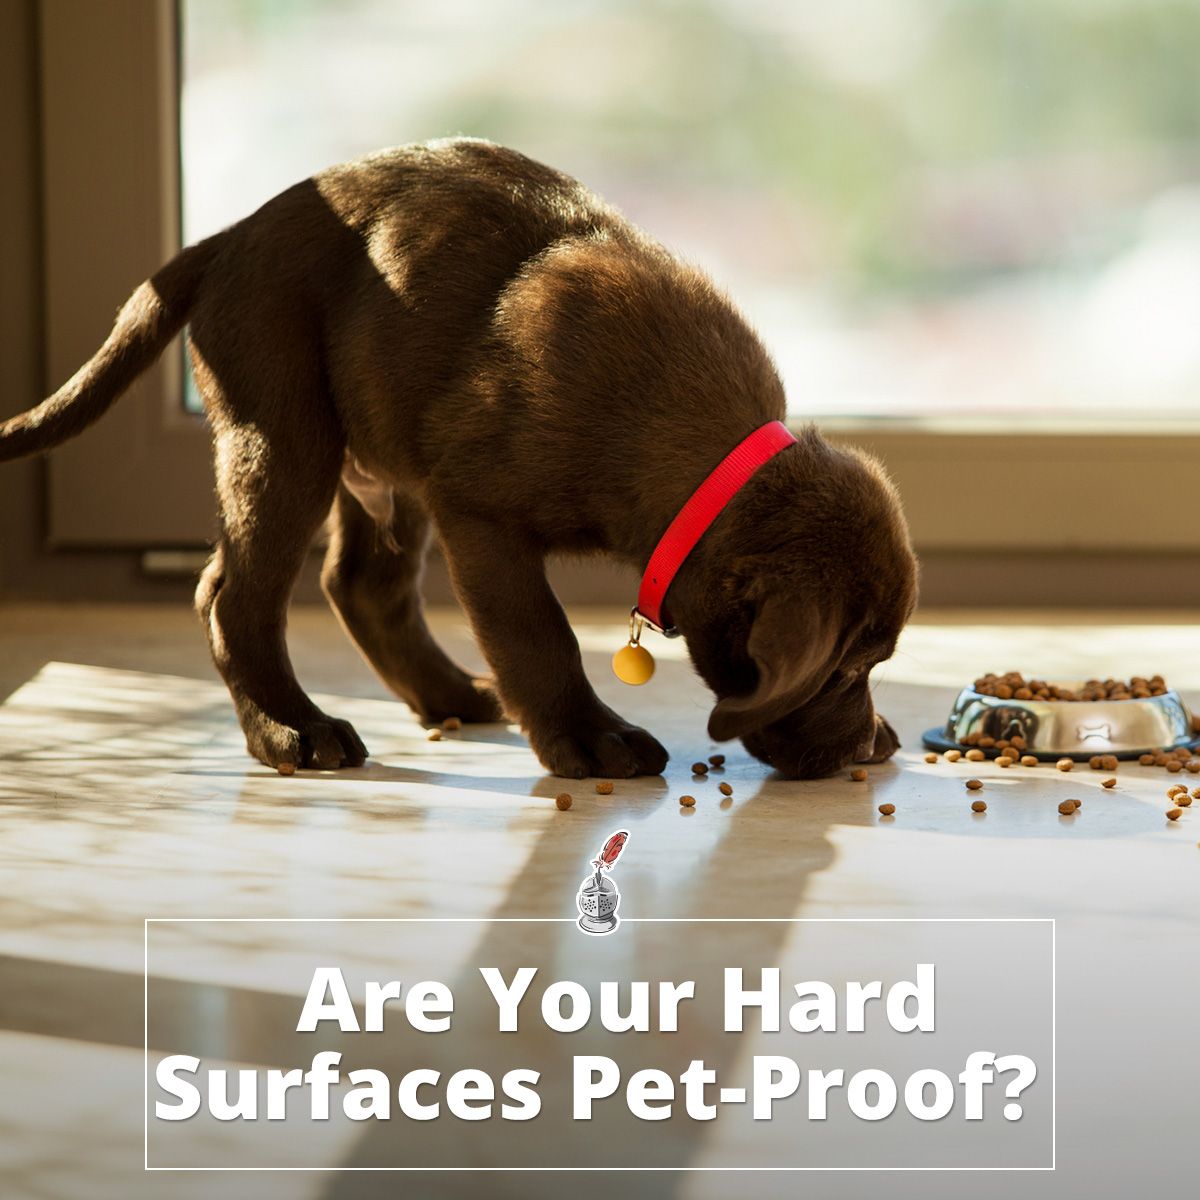 Are Your Hard Surfaces Pet-Proof